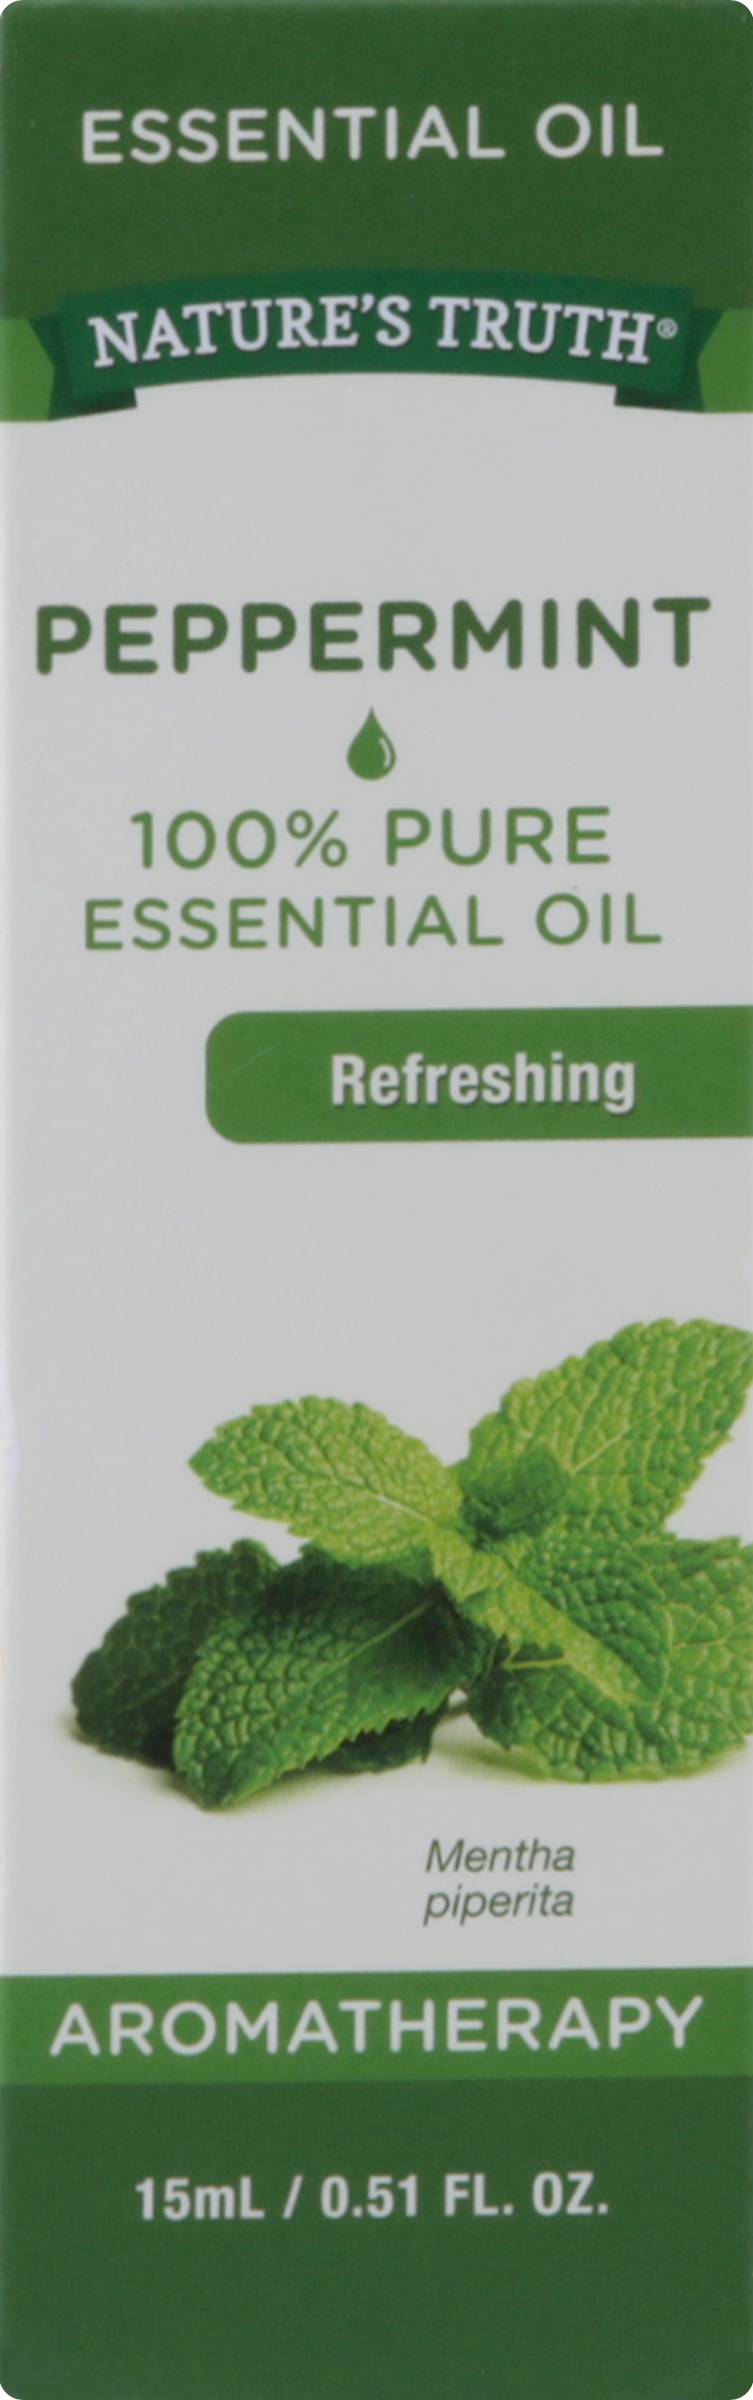 Nature's Truth 100% Pure Peppermint Essential Oil